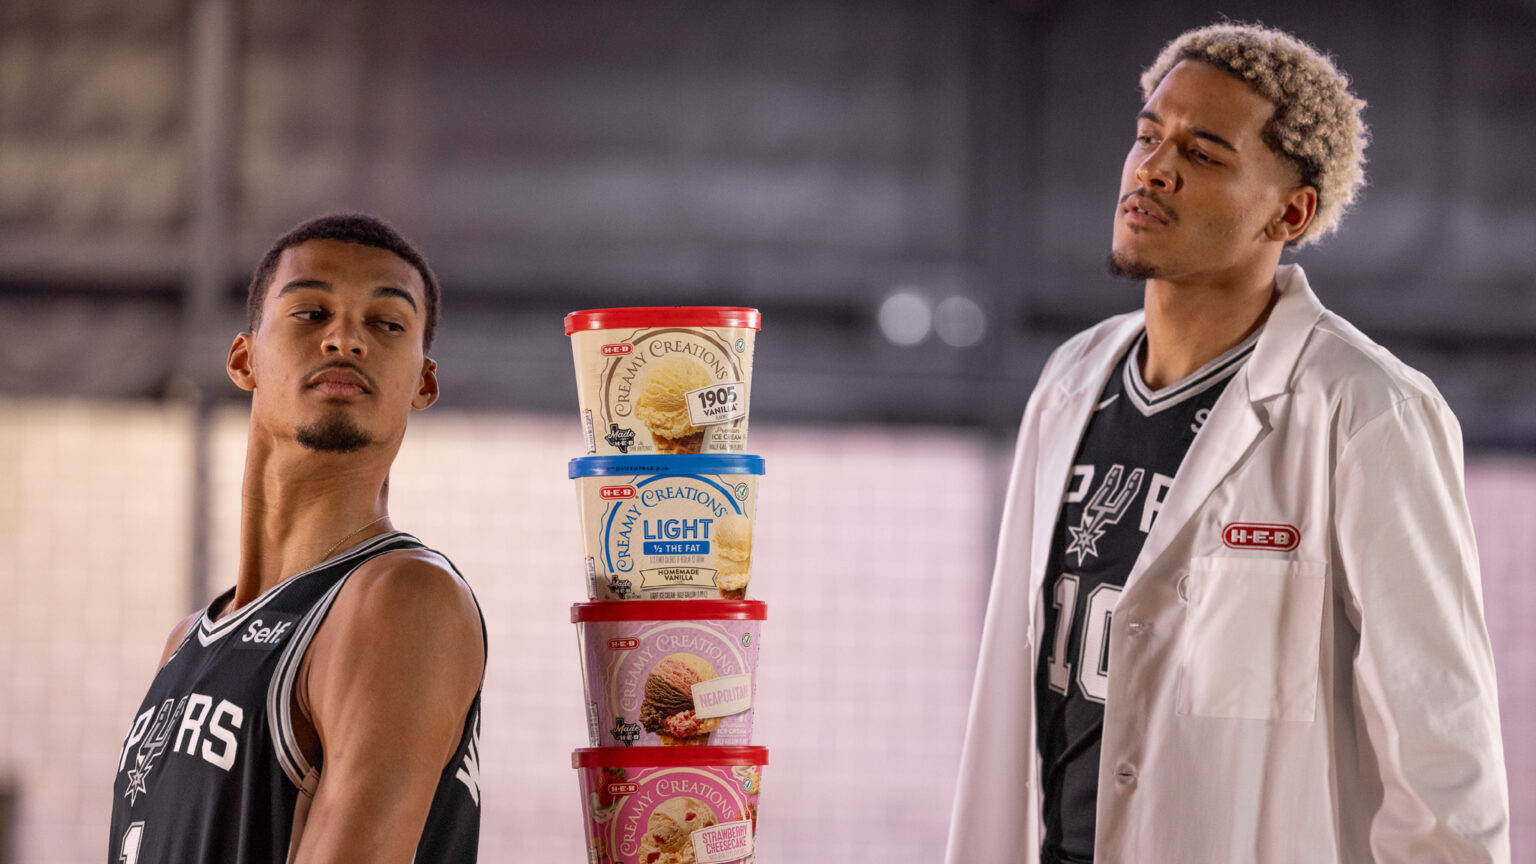 HEB launches second round of San Antonio Spurs commercials HEB